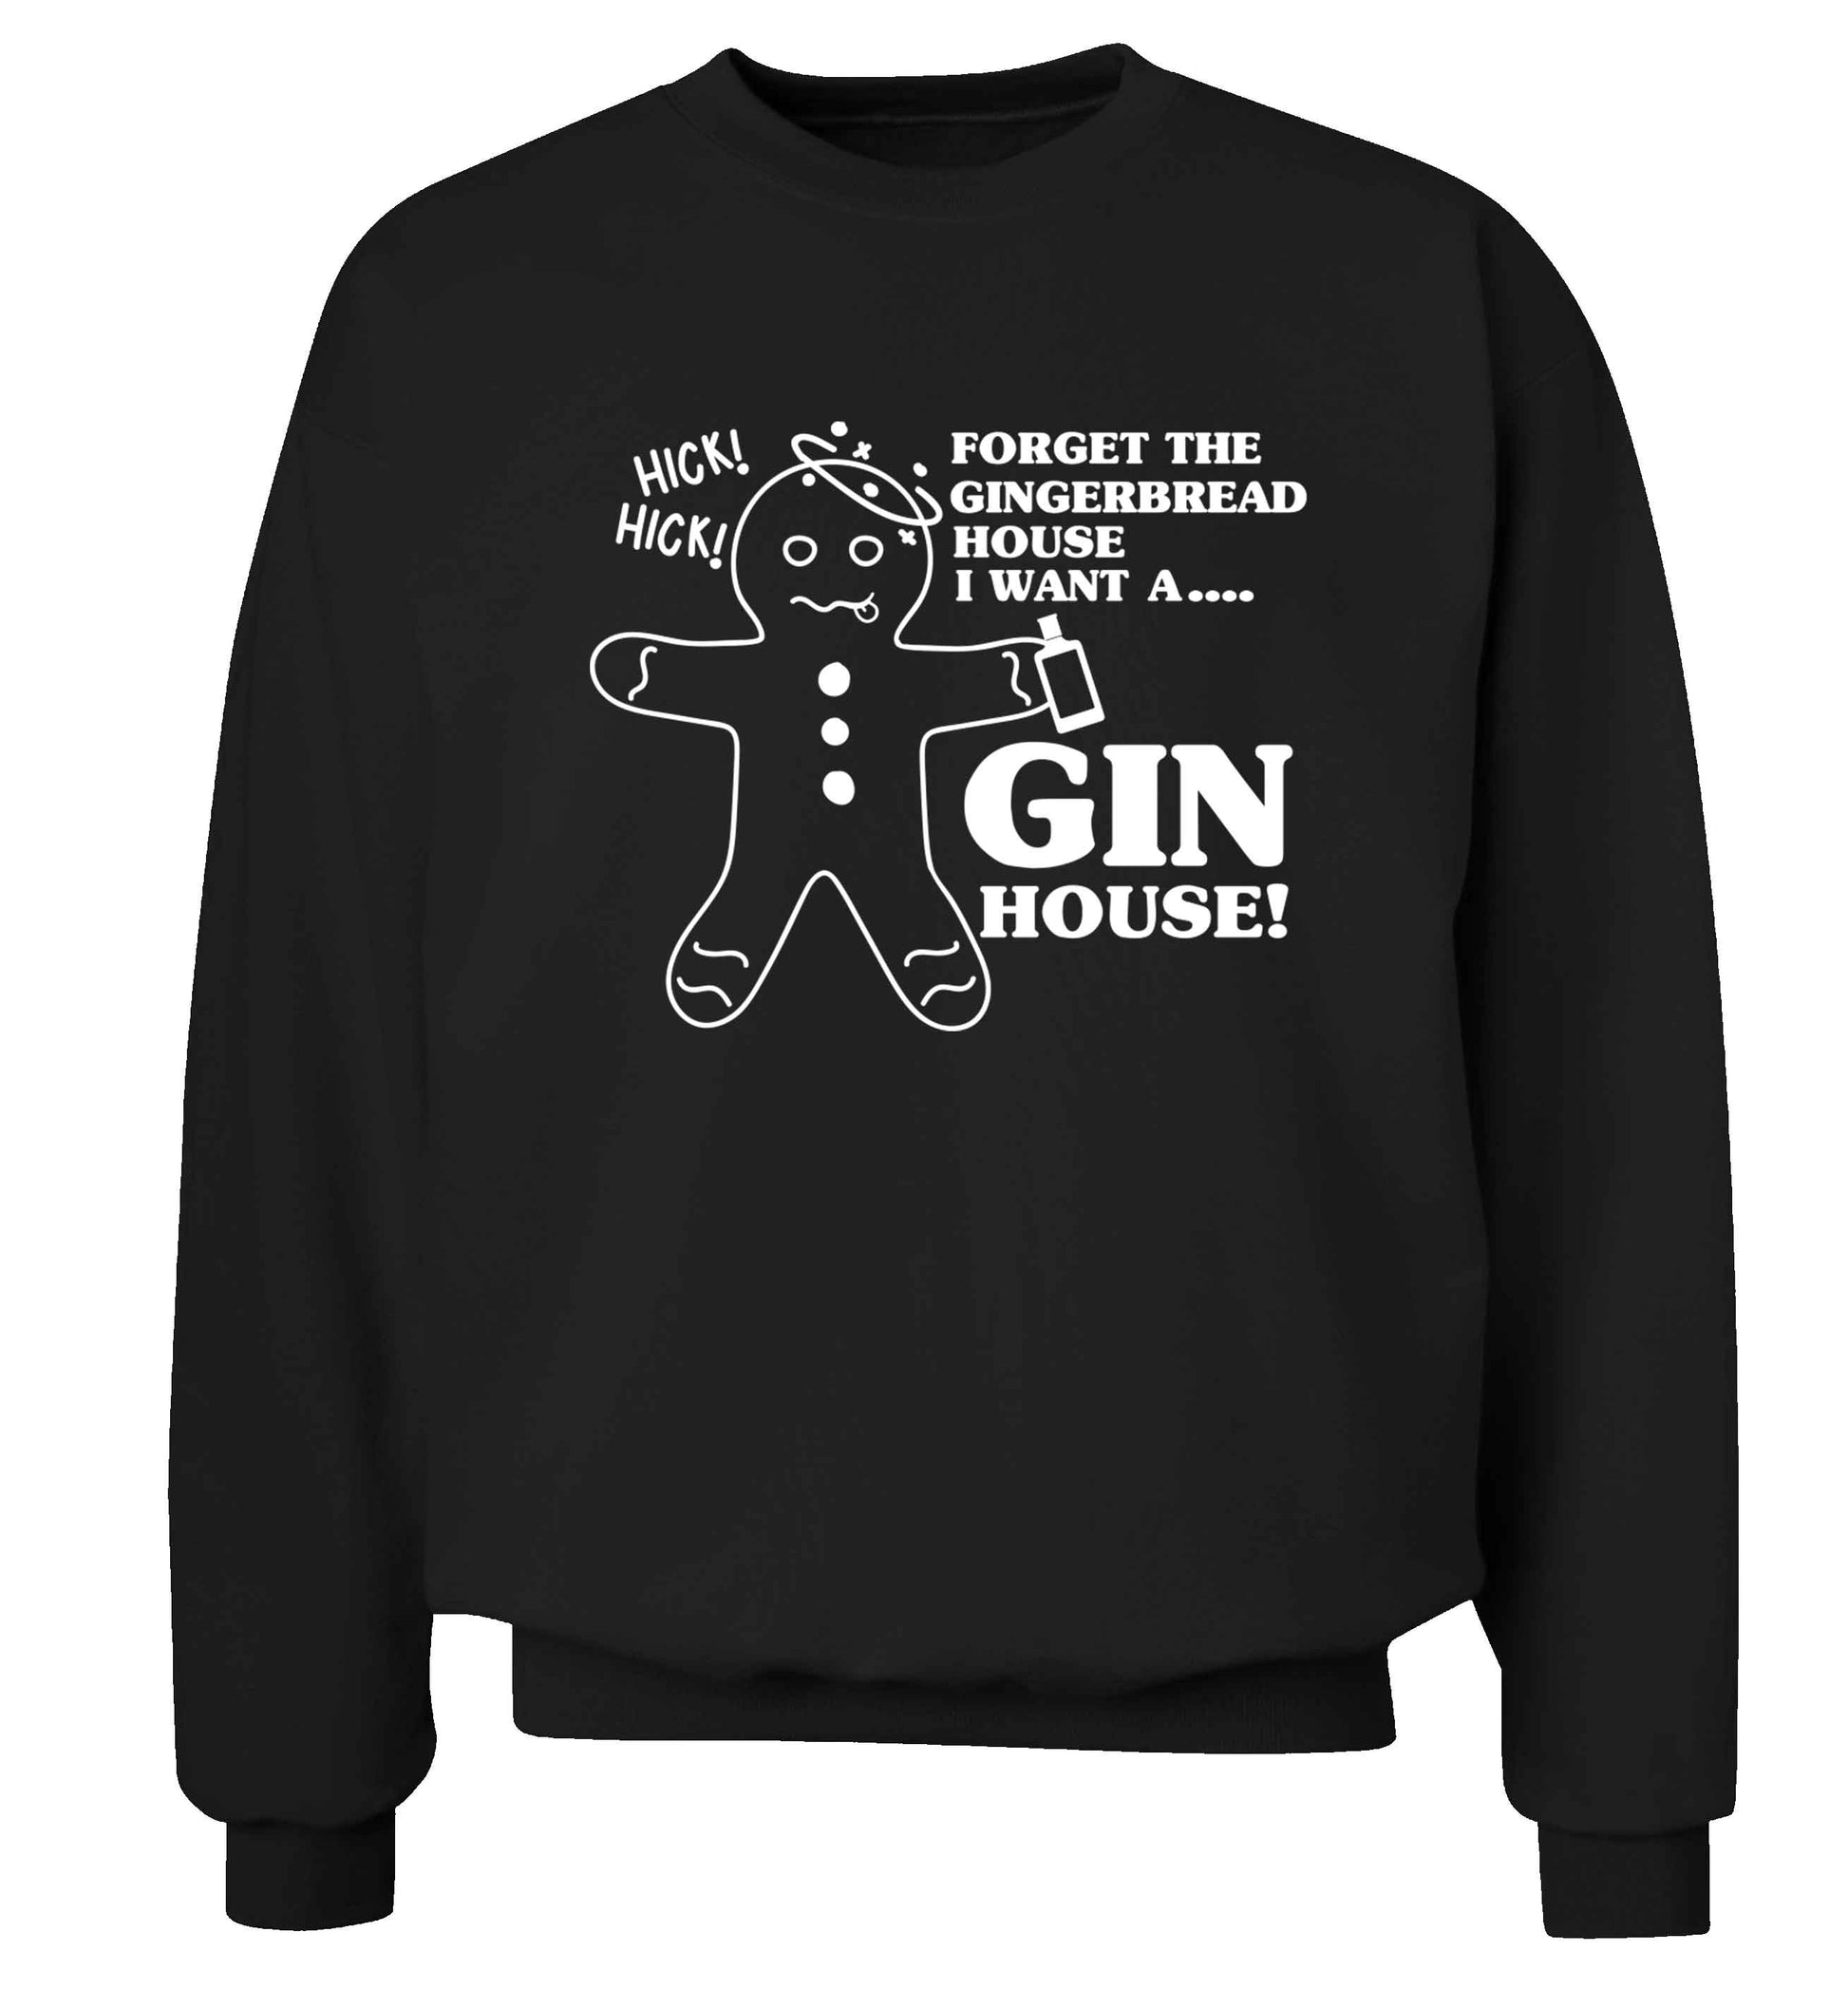 Forget the gingerbread house I want a gin house Adult's unisex black Sweater 2XL